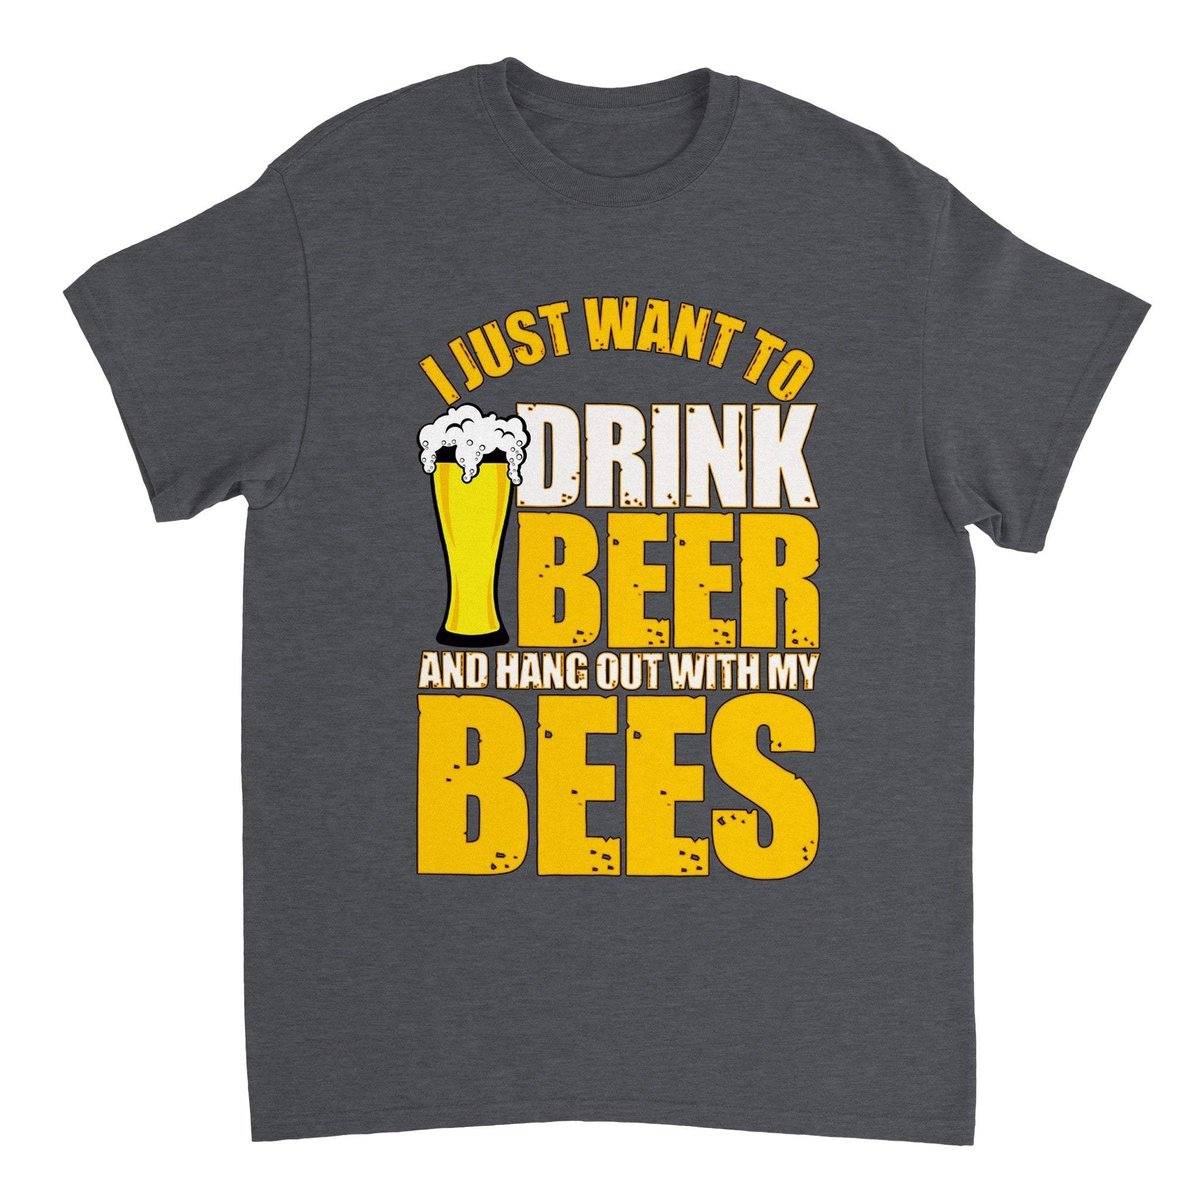 I Just Want To Drink Beer And Hang Out With My Bees T-Shirt - Funny Bee Beer Tshirt - Unisex Crewneck T-shirt Australia Online Color Dark Heather / S